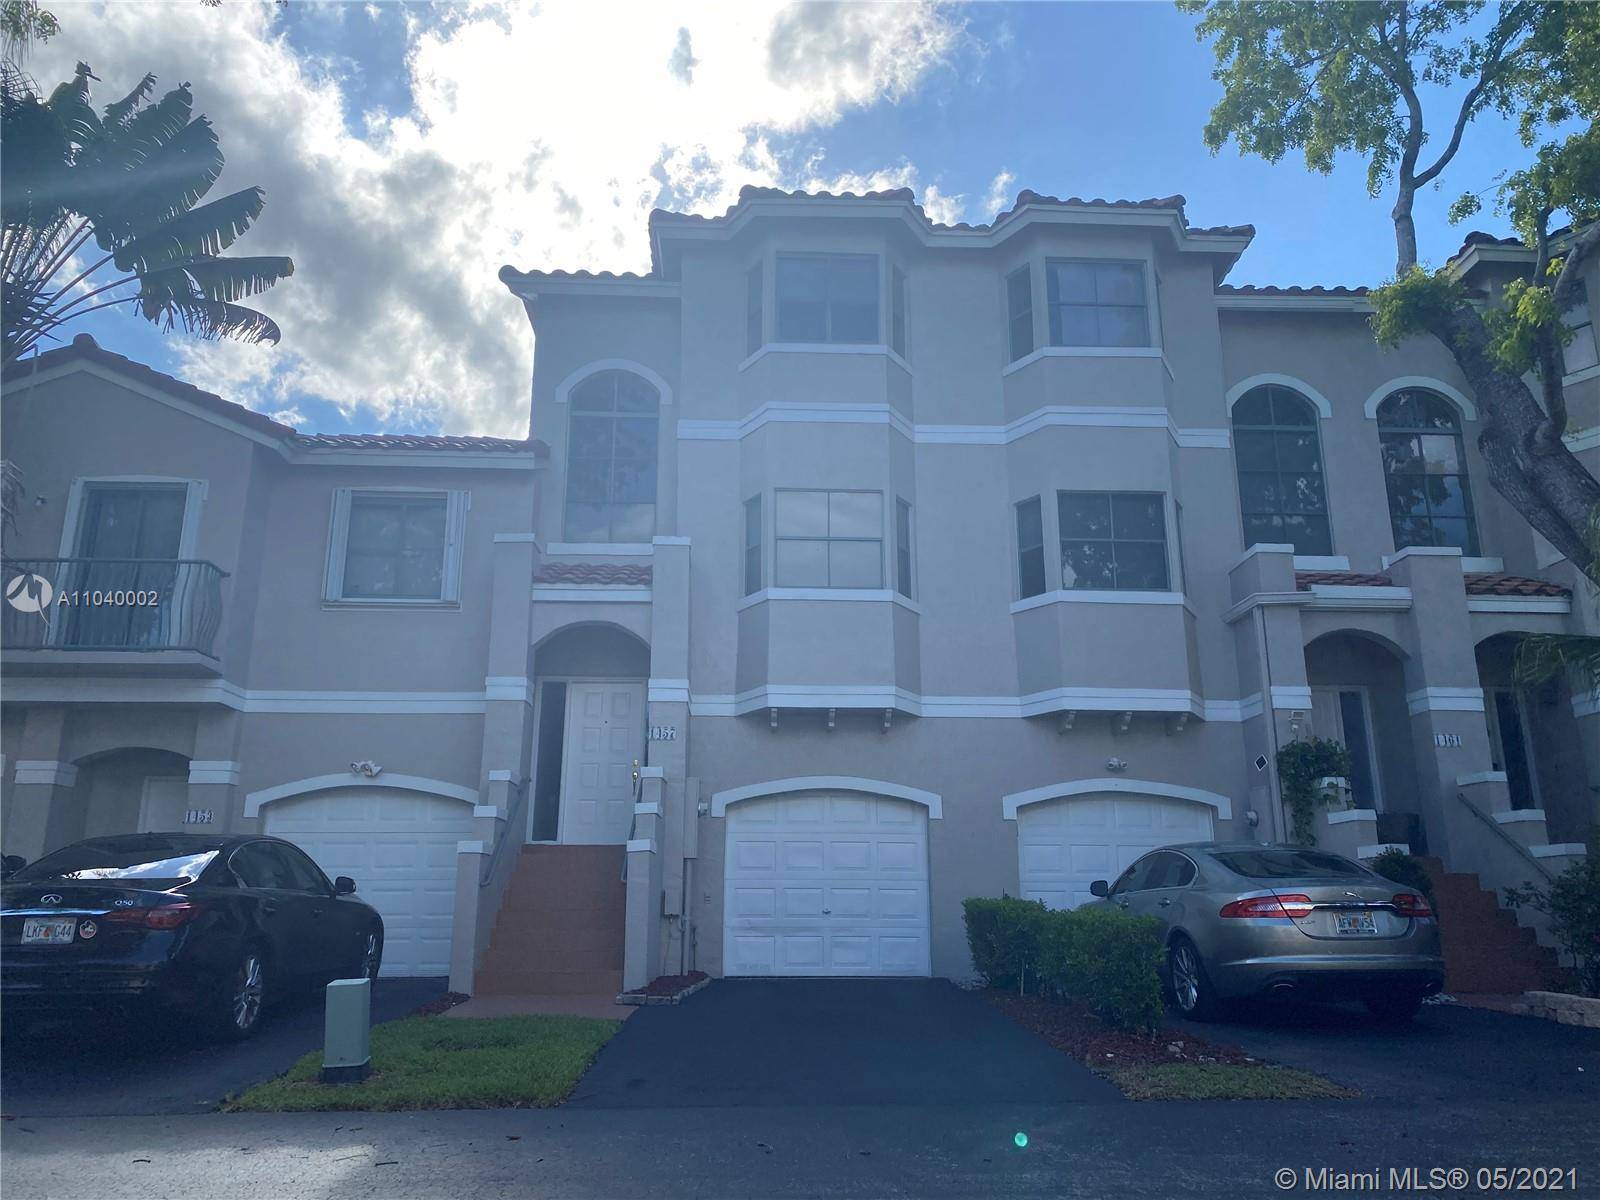 Gorgeous 3 bedroom 2. 5 bathroom townhouse with bonus loft located in the sought after Residence of Sawgrass Mills.